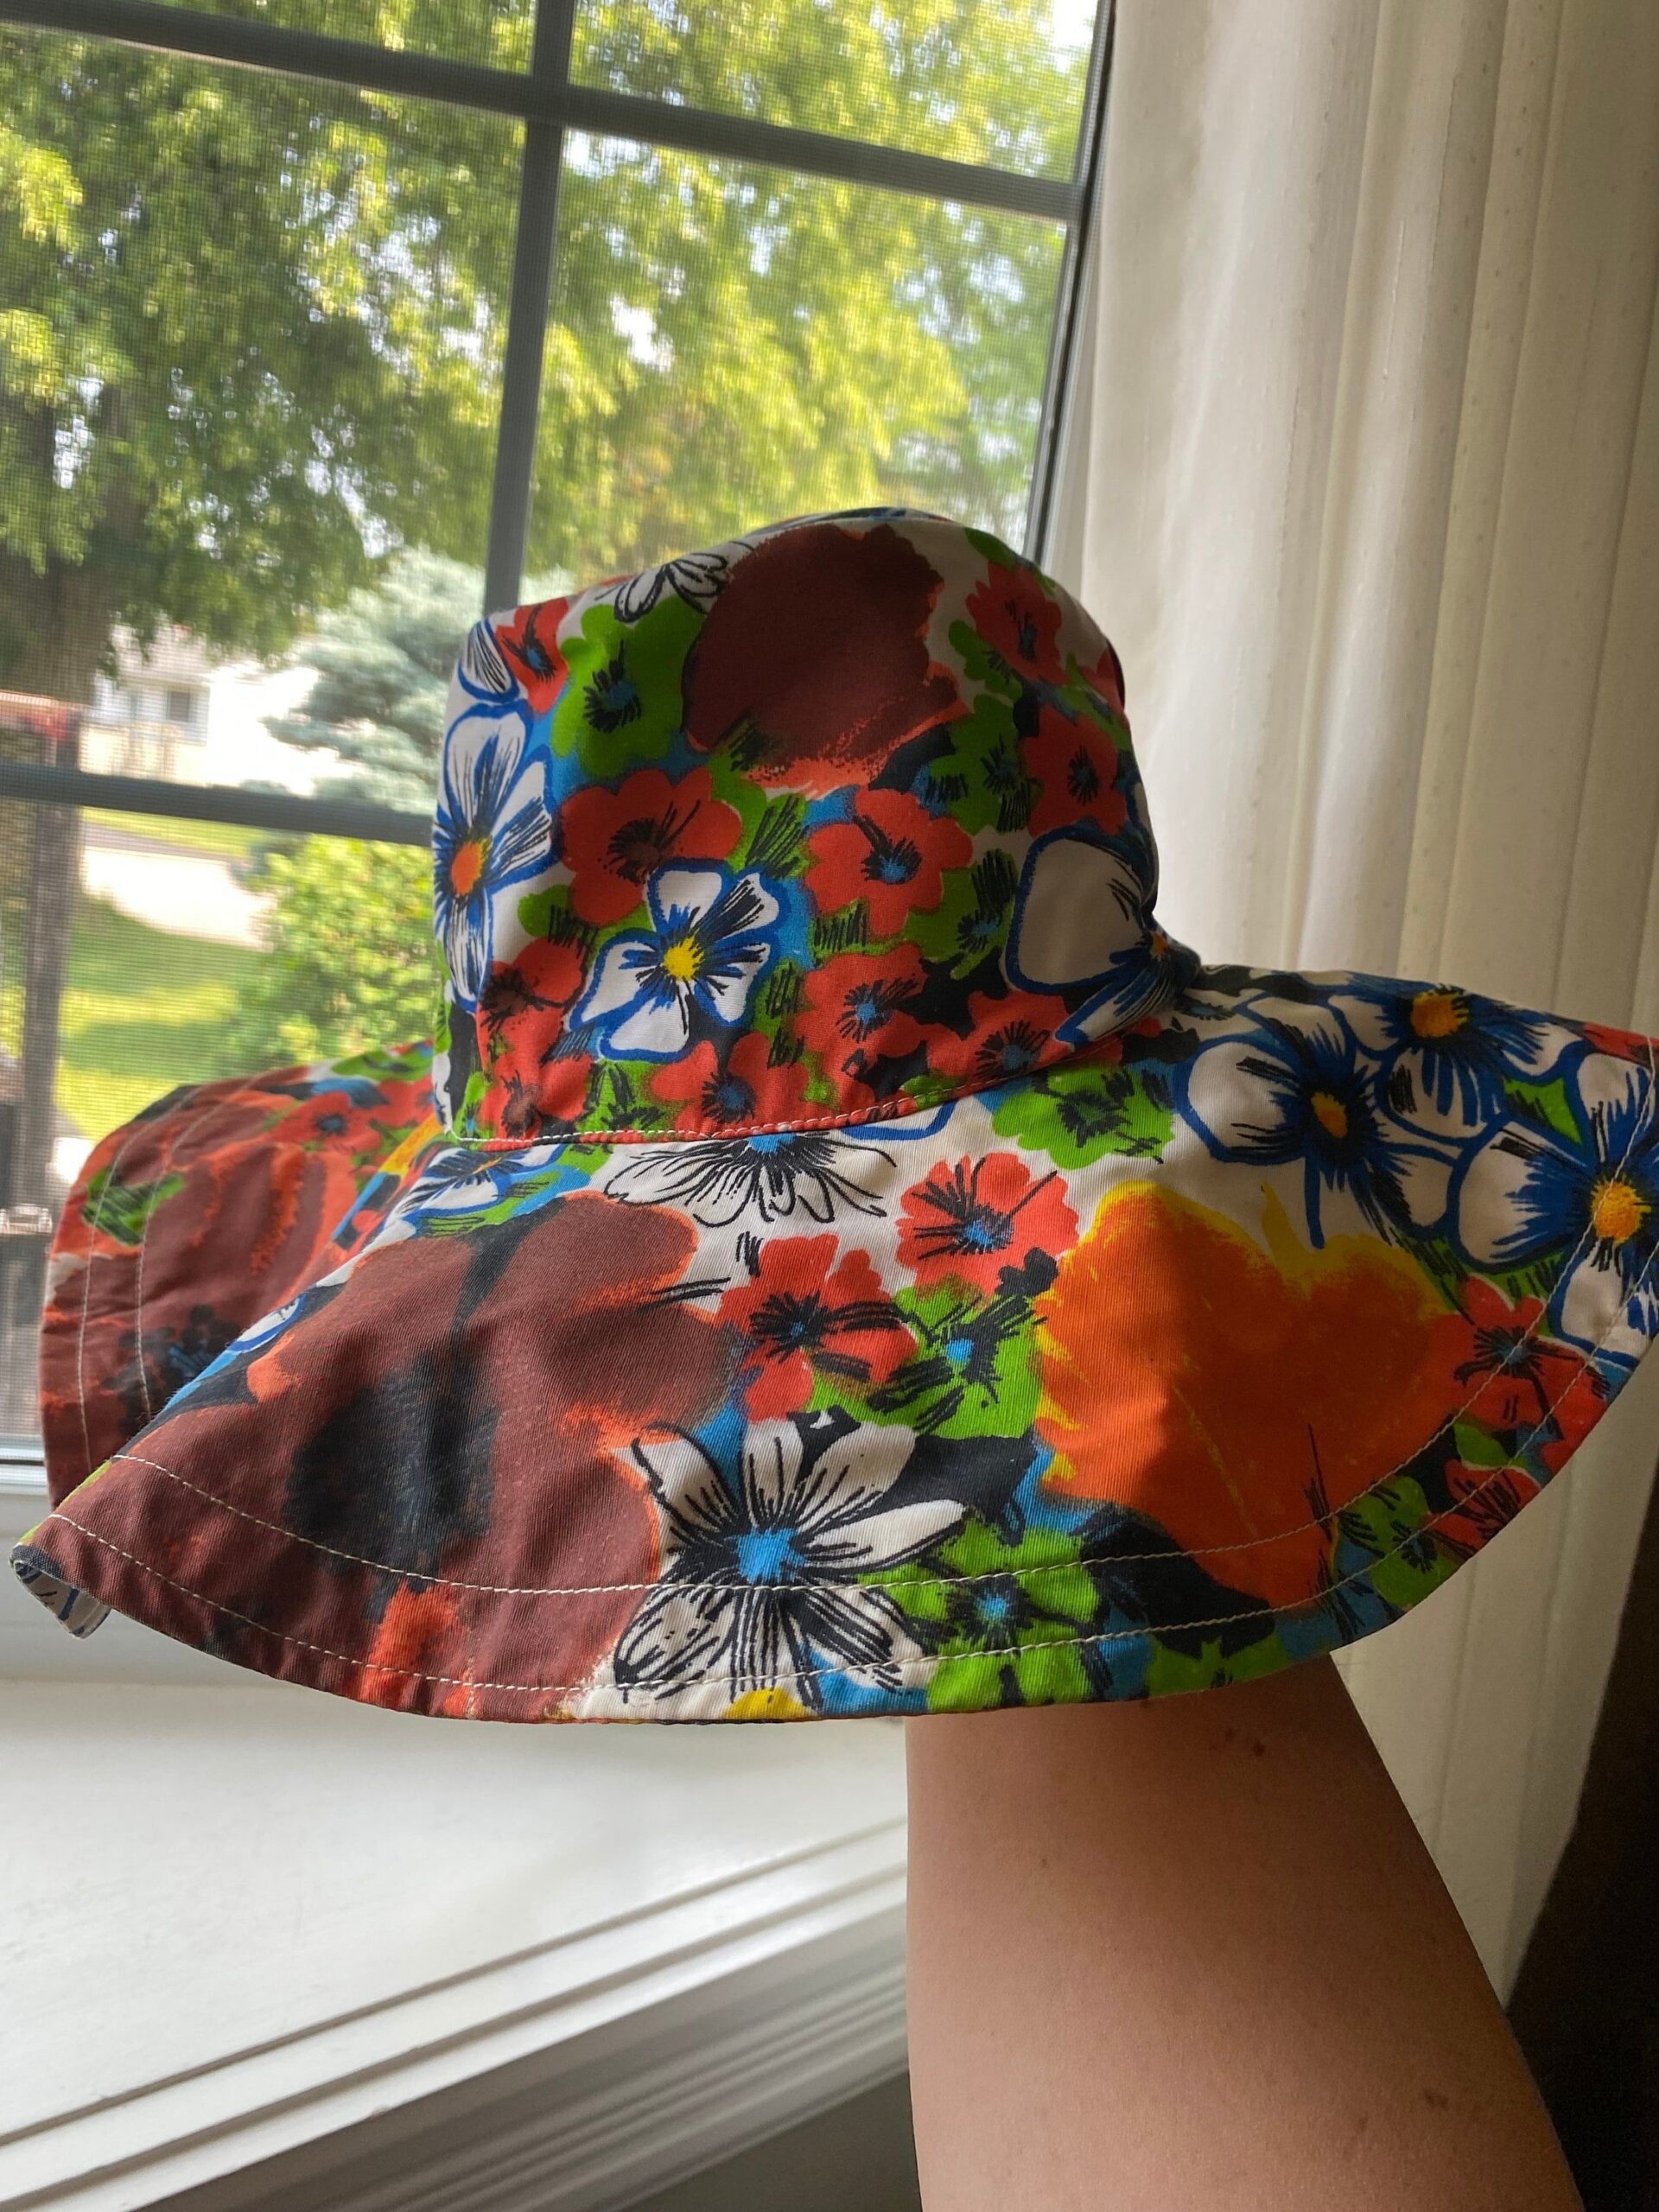 A
Floppy Sun Hat For Some Stylish Protection From The Sun